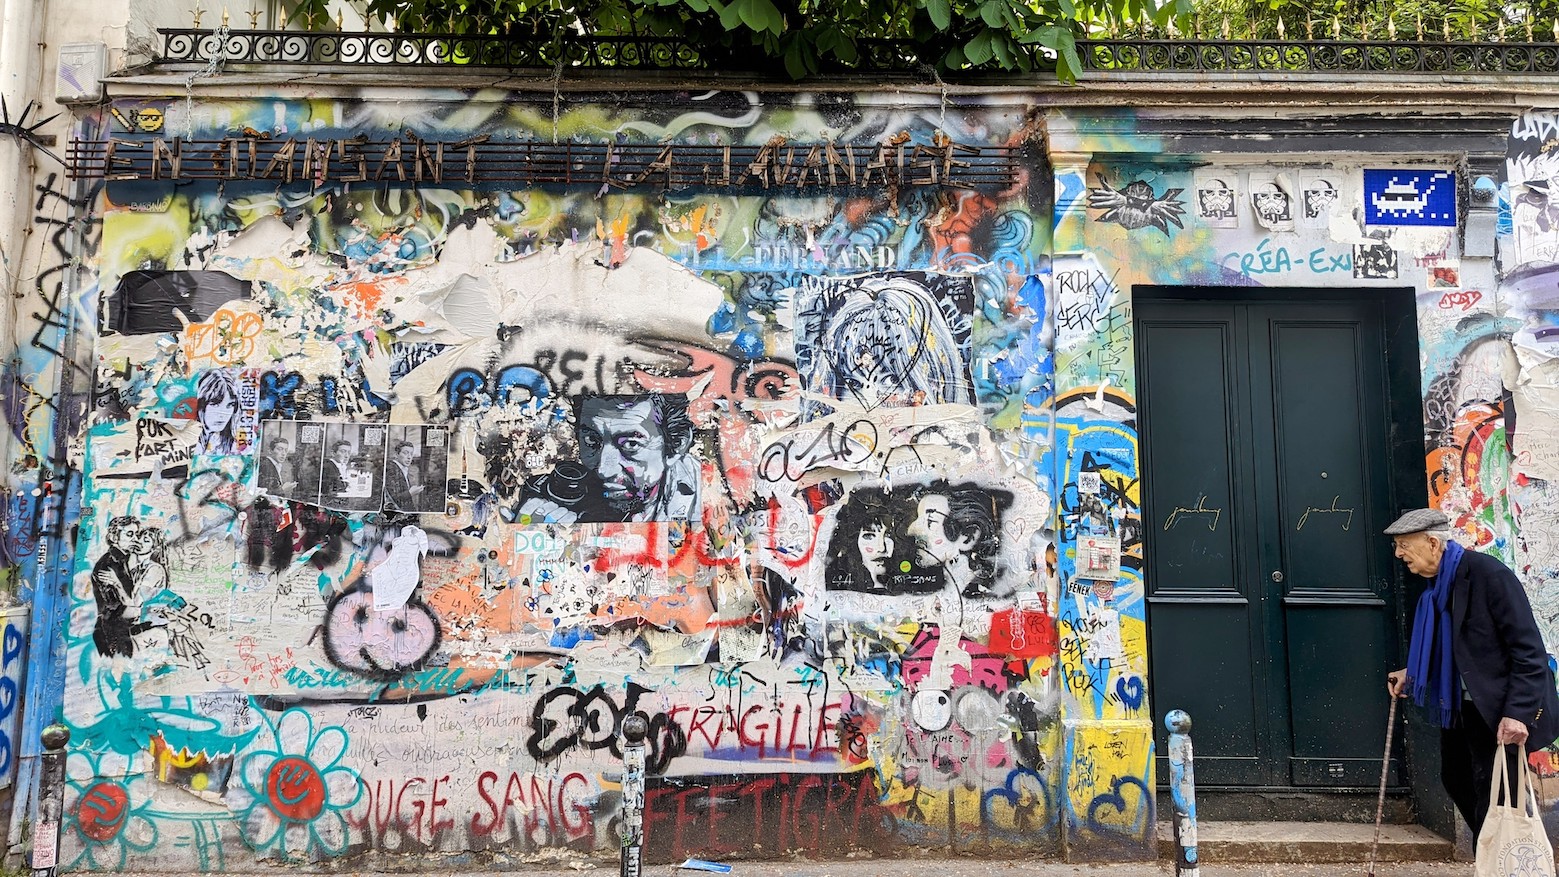 The wall of Serge Gainsbourg's house has been covered with graffiti by his fans.